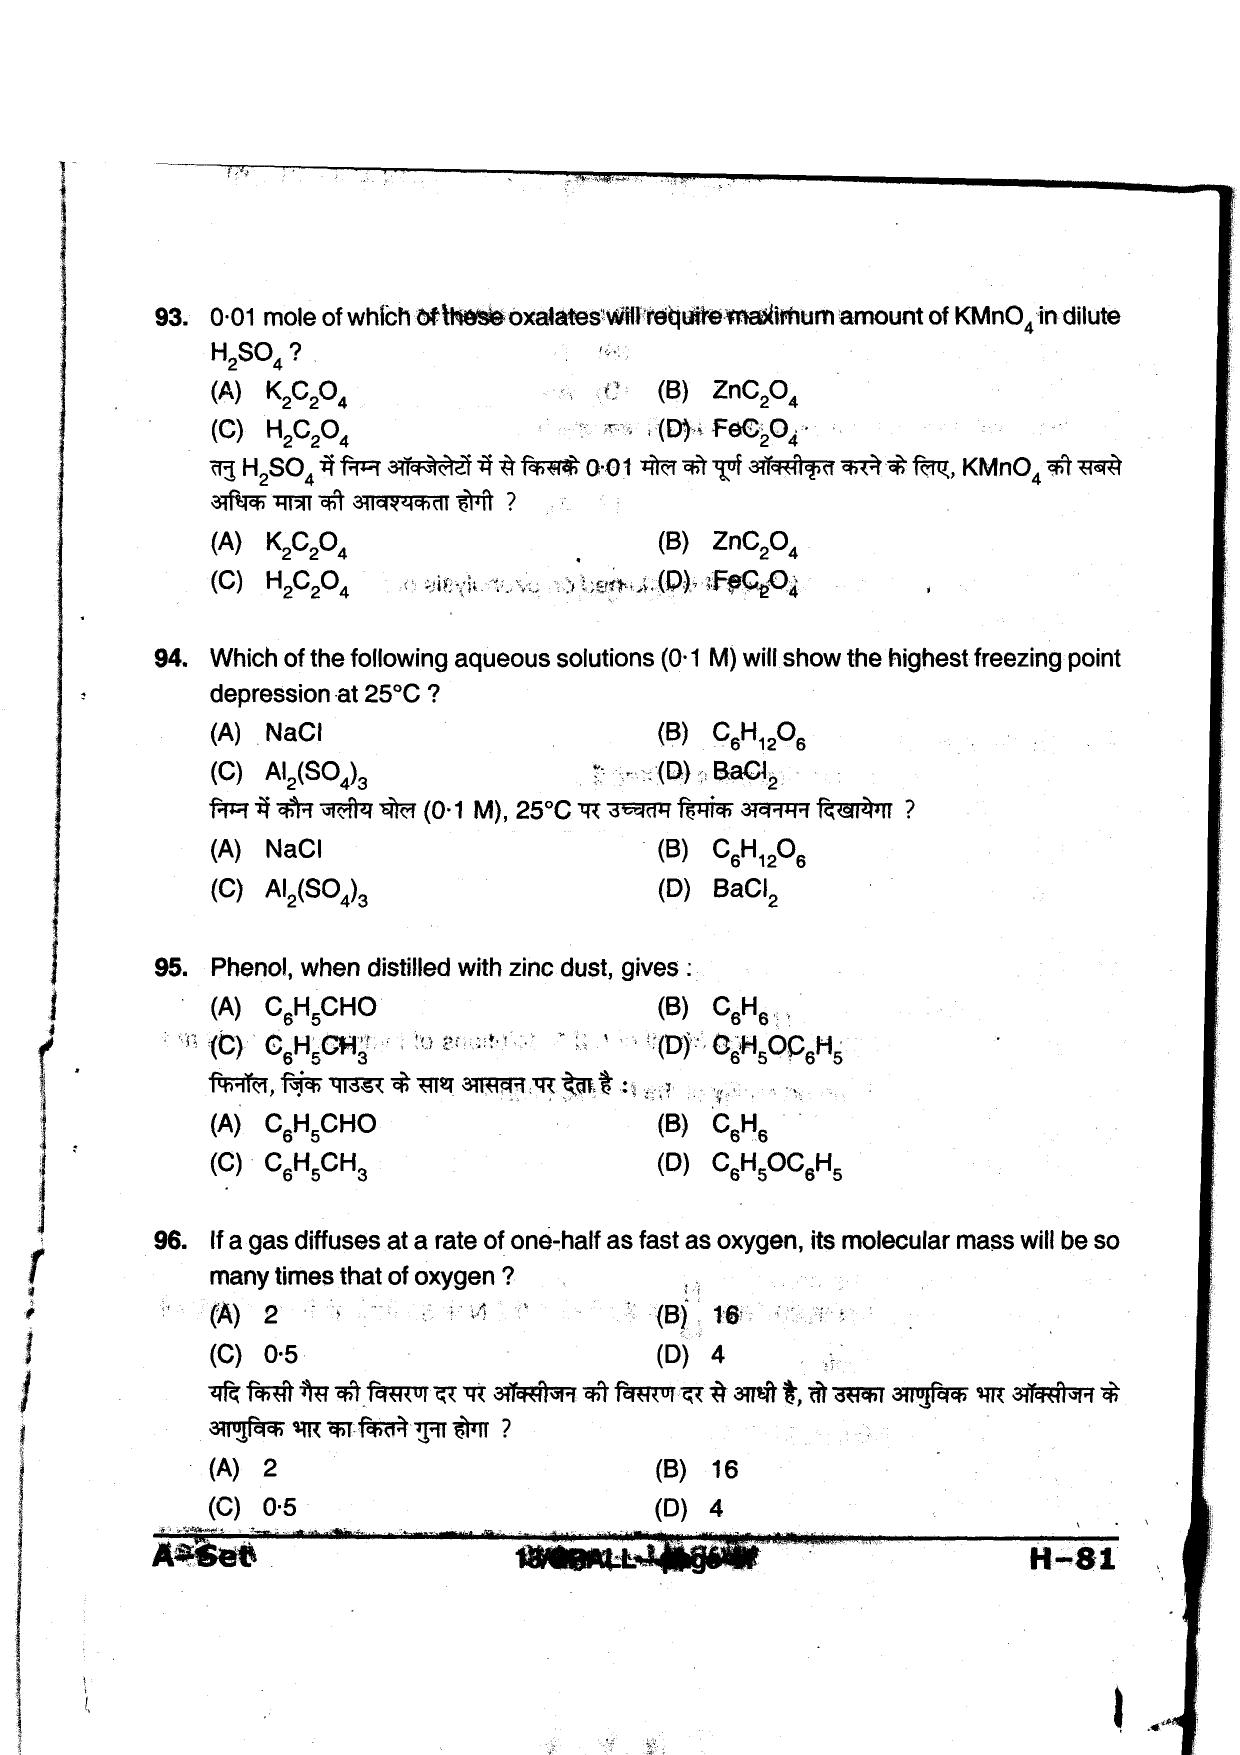 MP PAT 2013 Question Paper - Paper I - Page 41